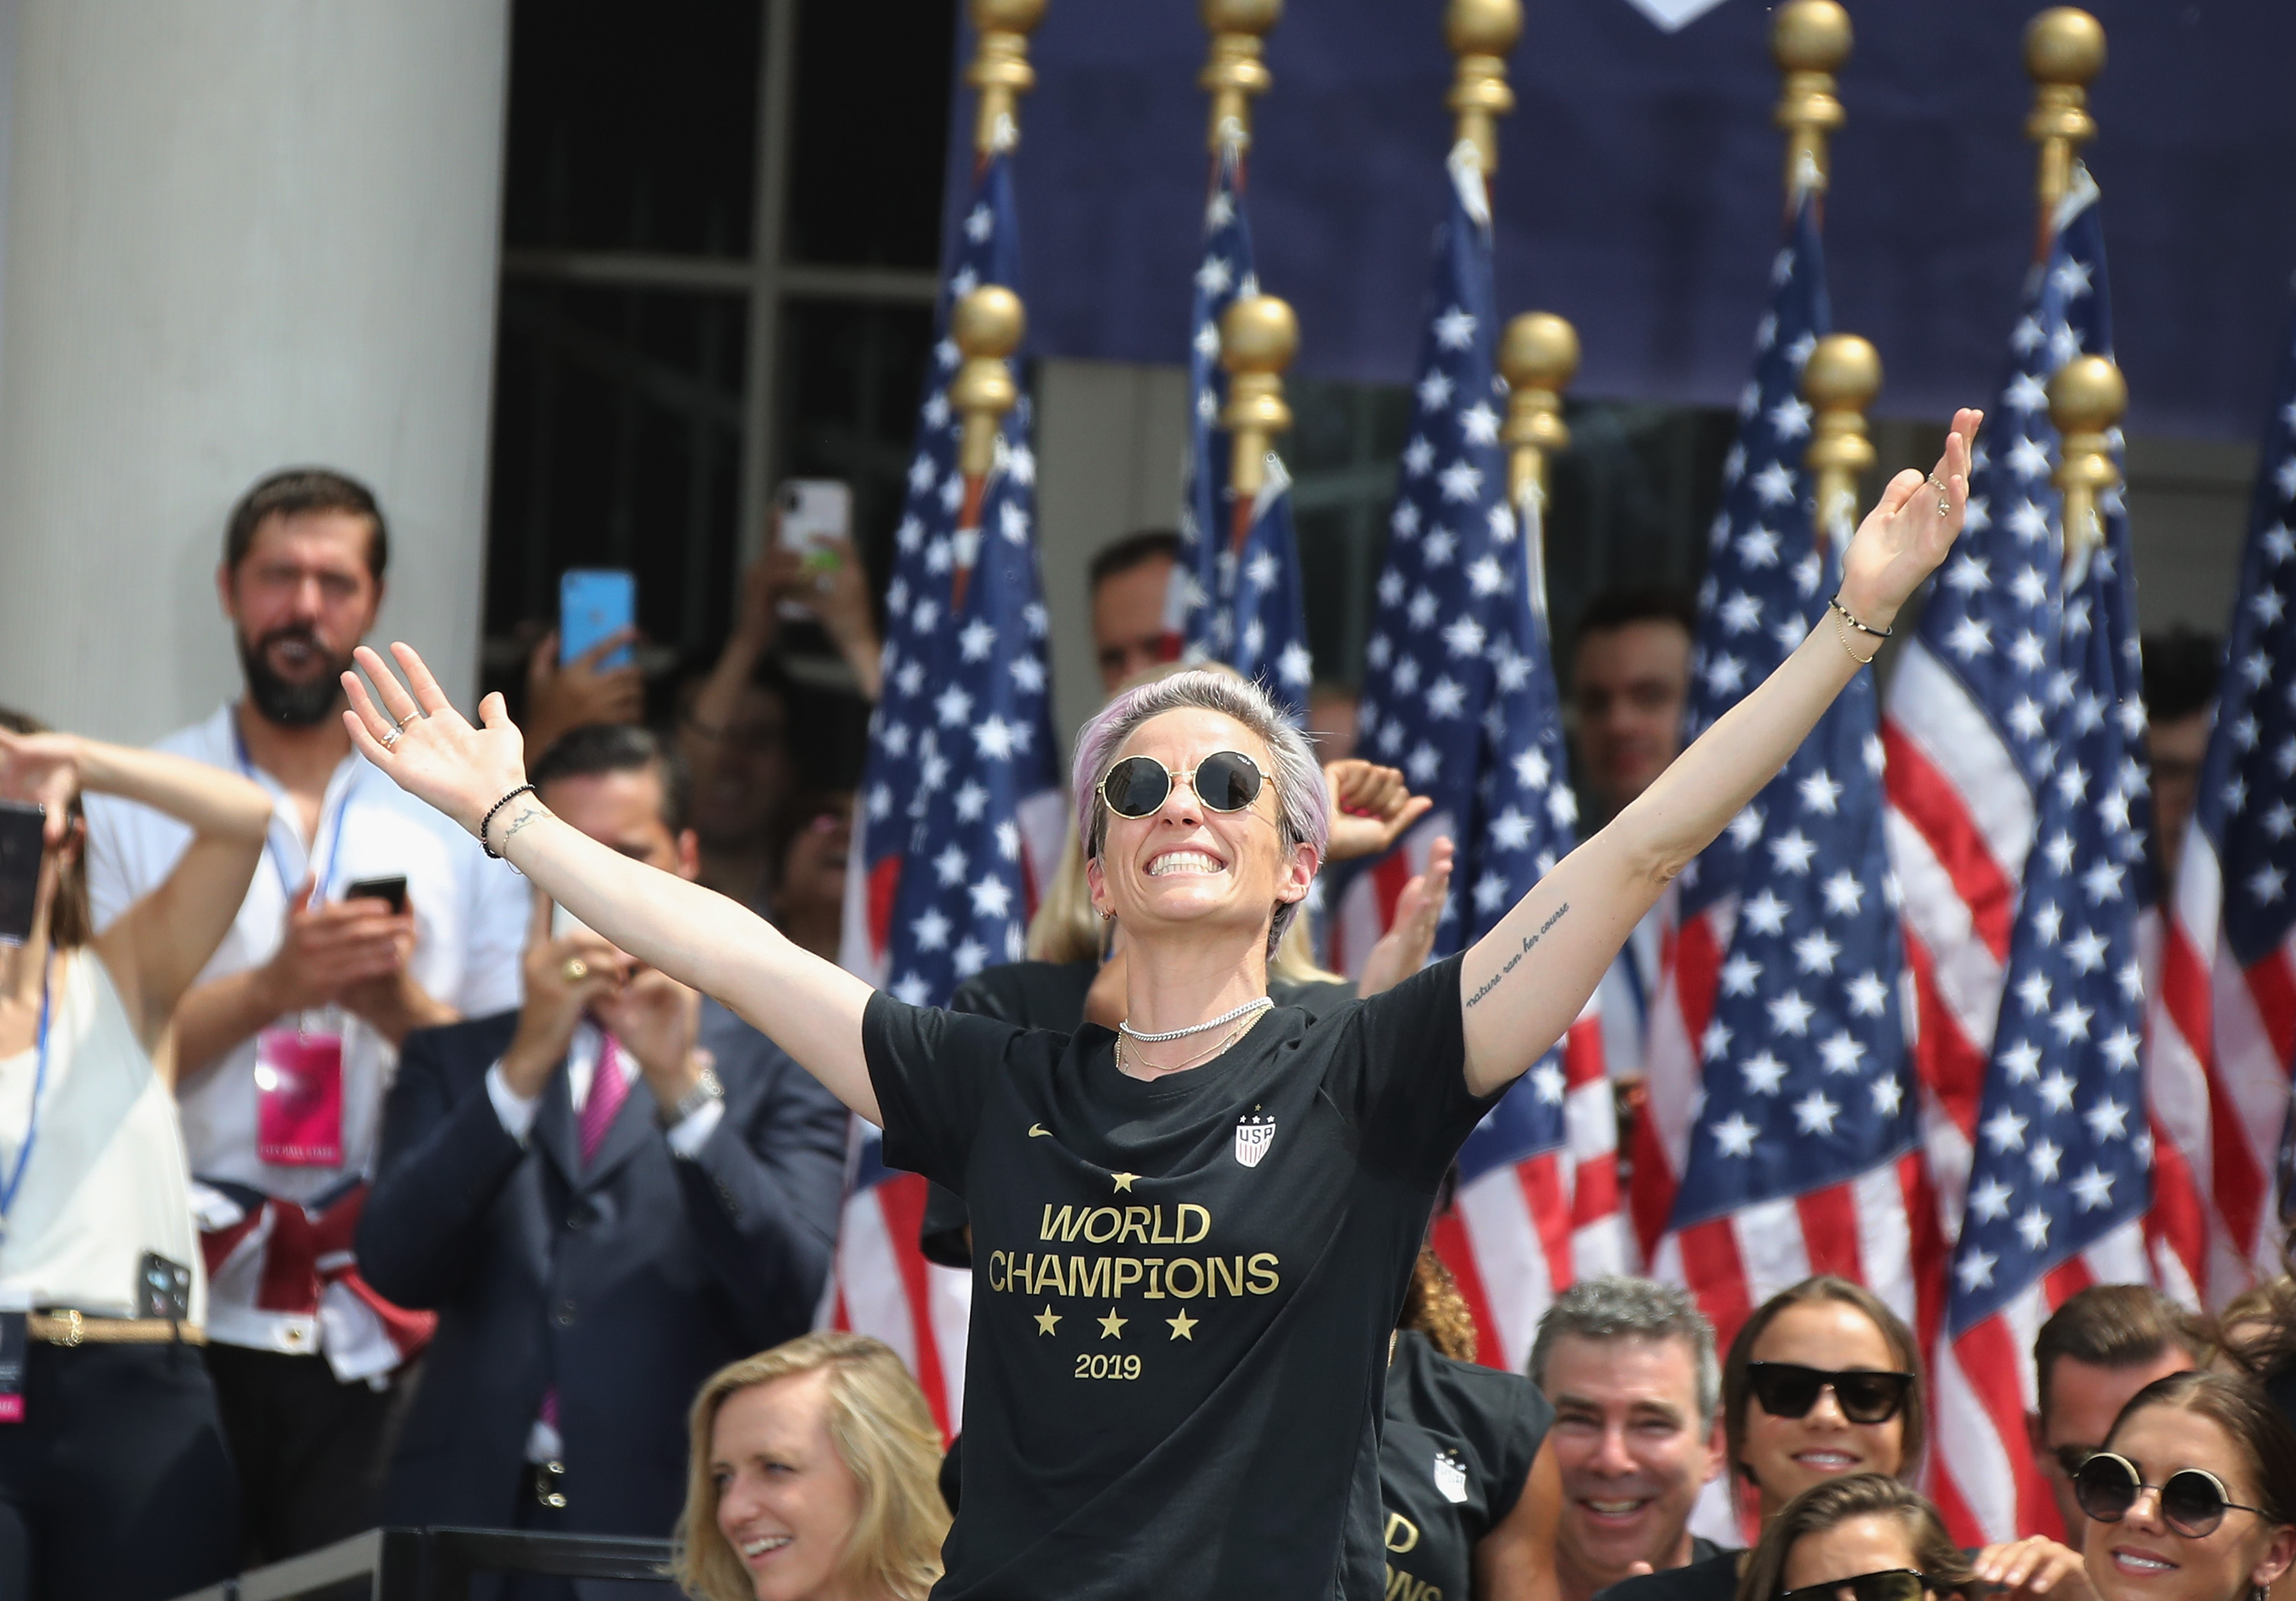 Megan Rapinoe was scheduled to appear at OZY Fest